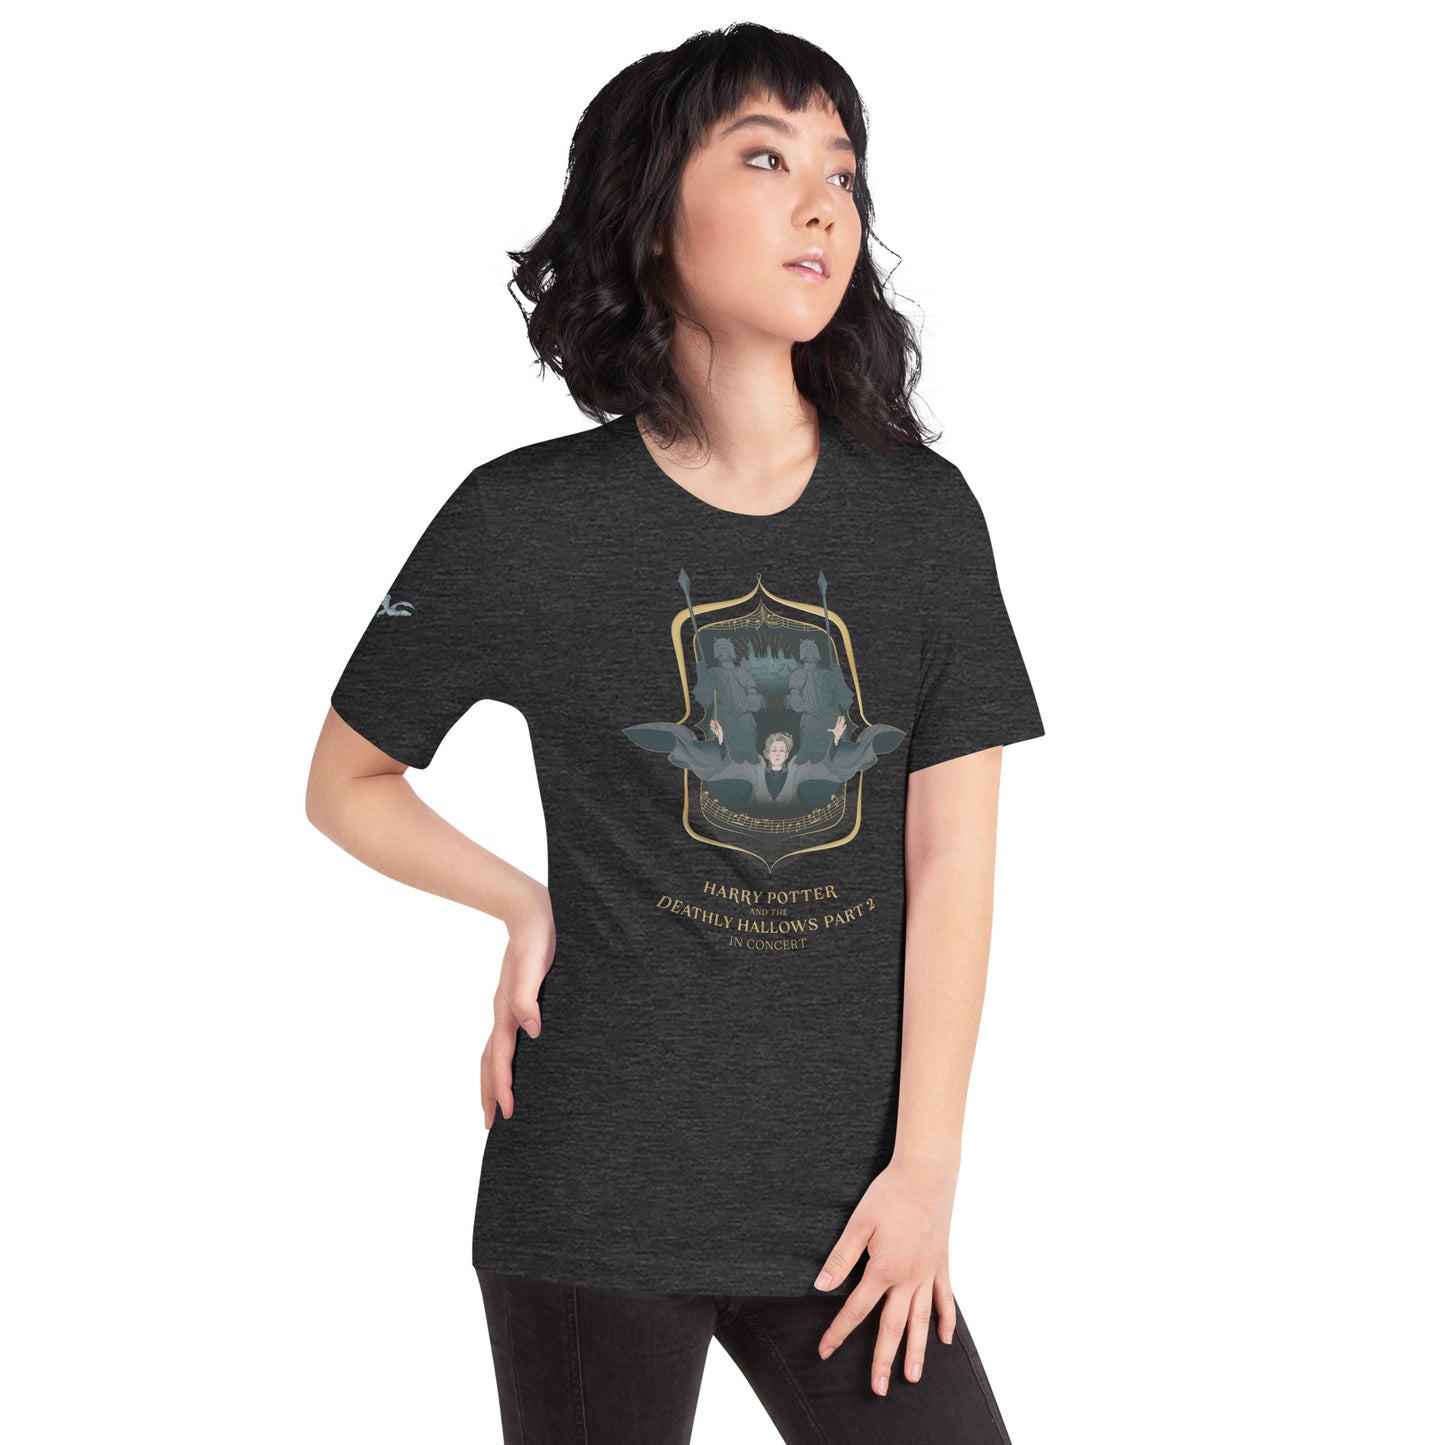 Harry Potter and the Deathly Hallows™ - Part 2 Unisex t-shirt (Chess)